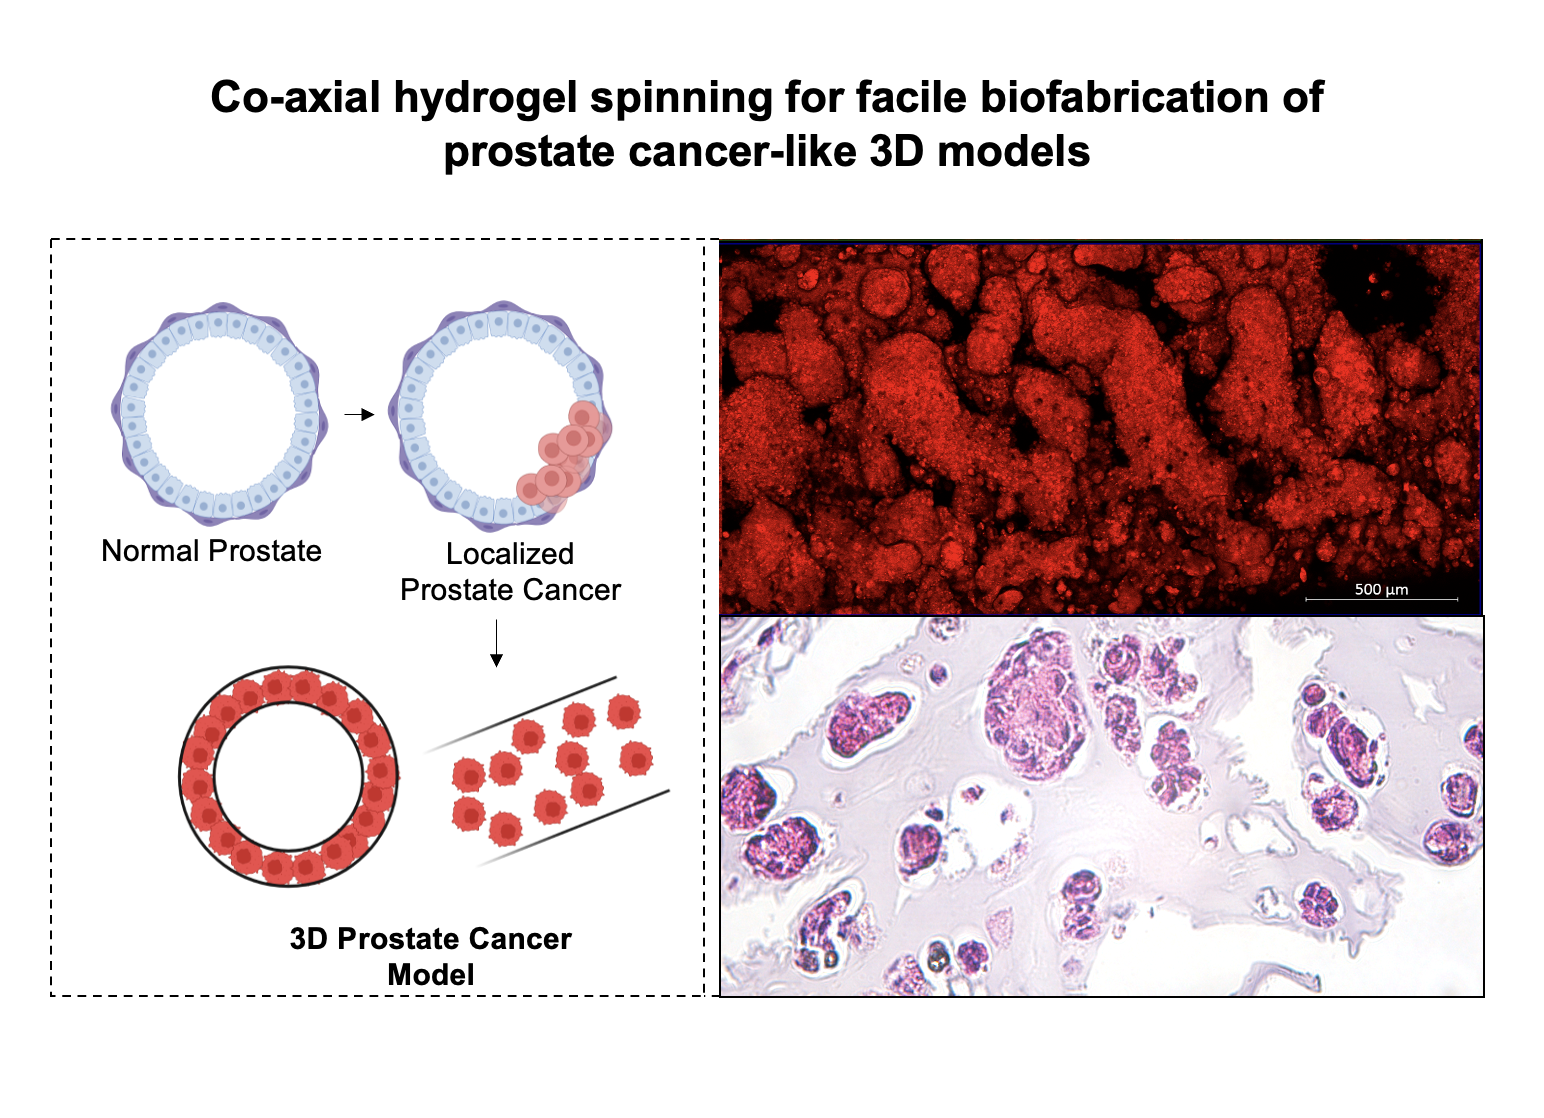 Co-axial hydrogel spinning can construct facile biofabrication of prostate cancer-like 3D models